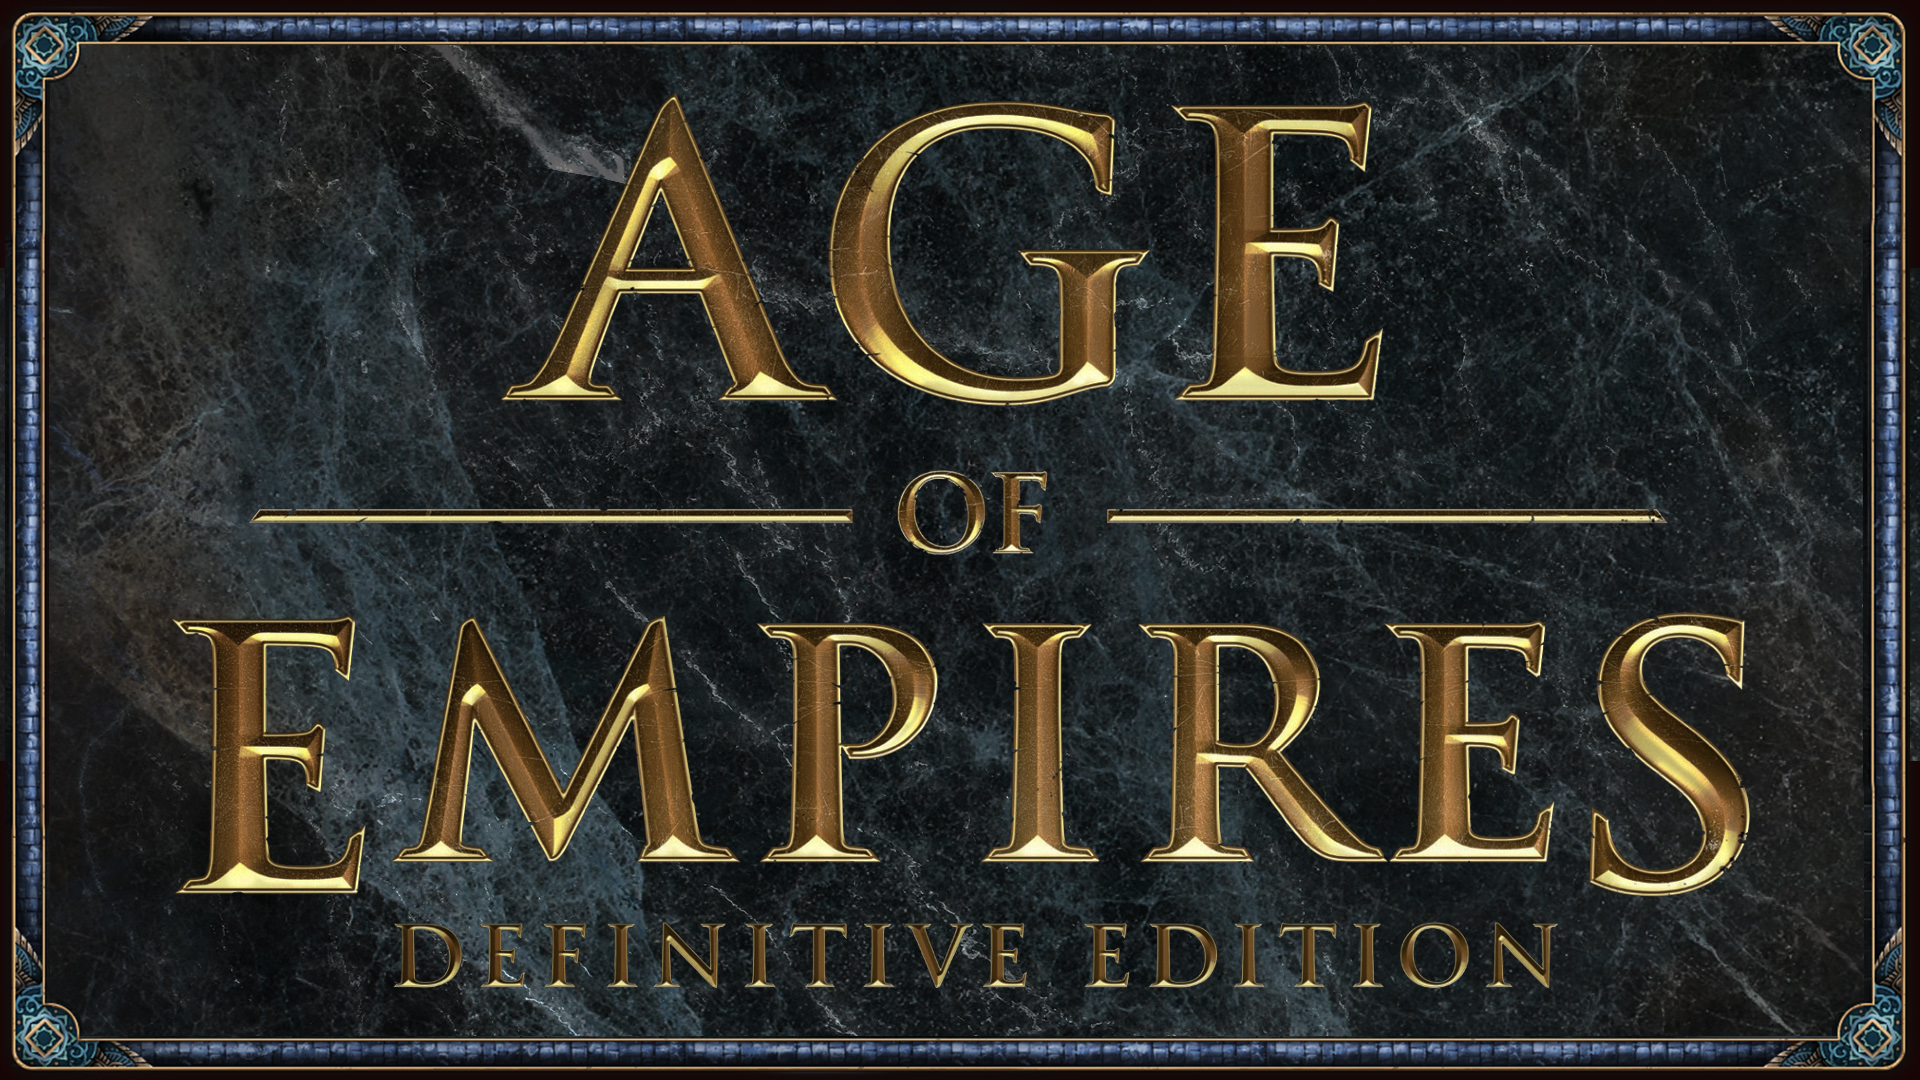 Age of empires 3 in steam фото 117